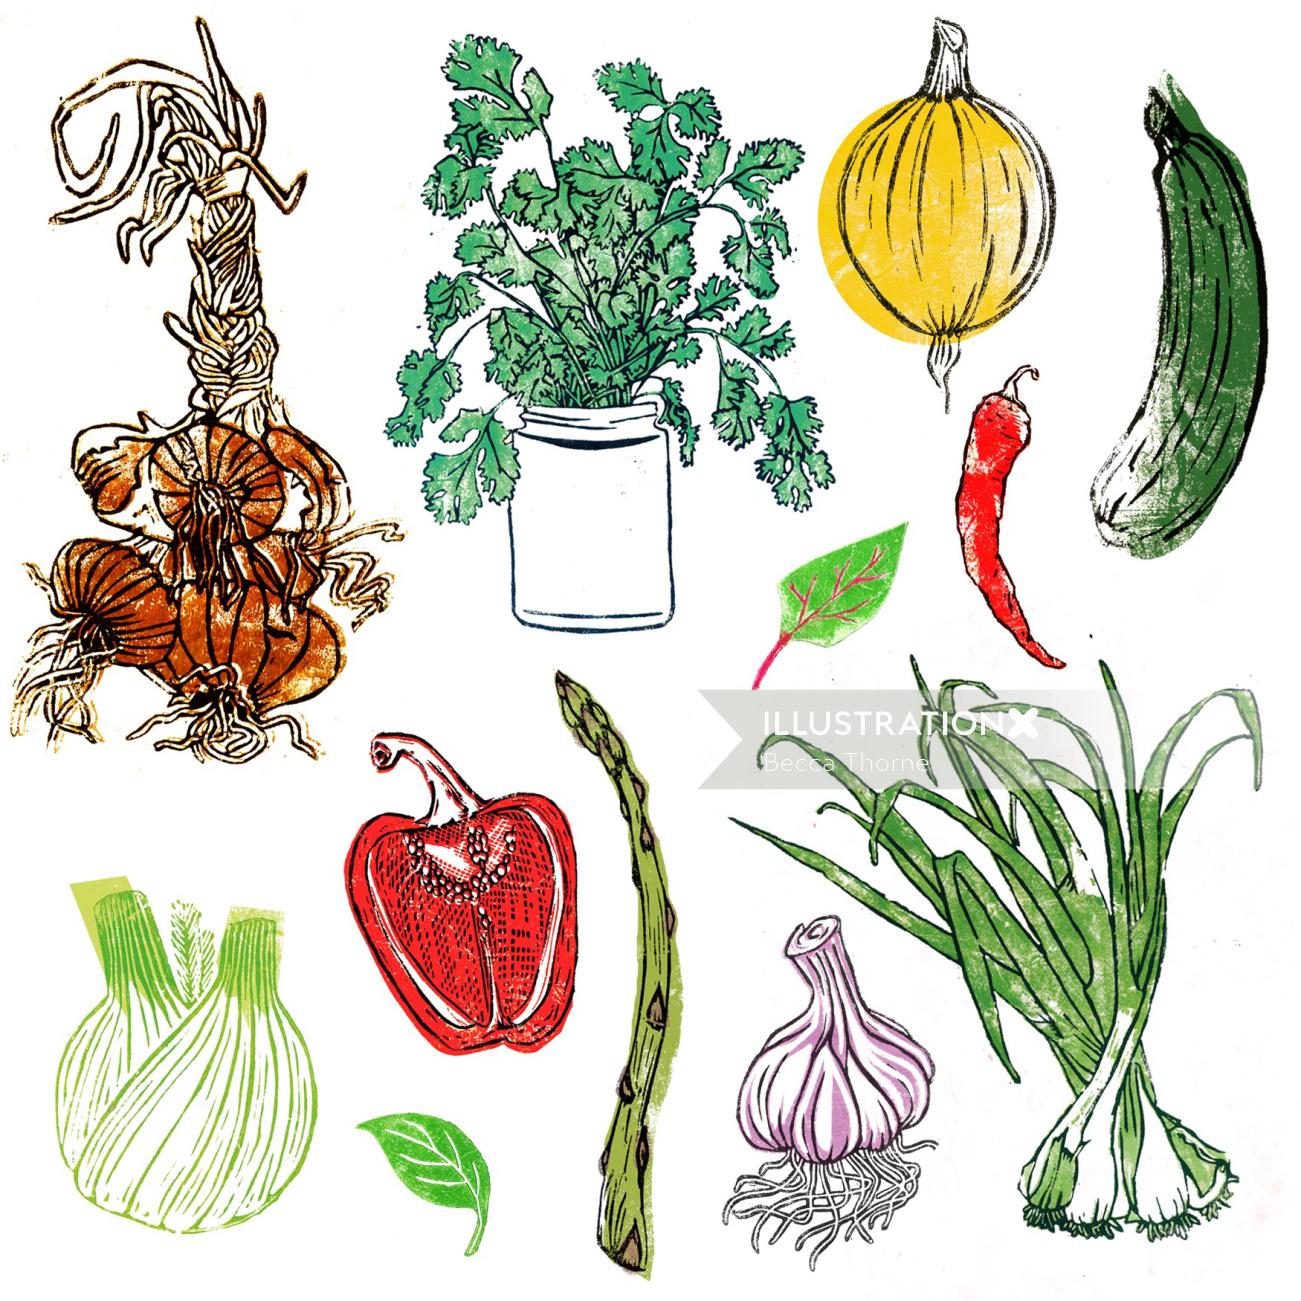 Selection of linocut vegetable illustrations: A string of brown onions, jar of coriander, round yell